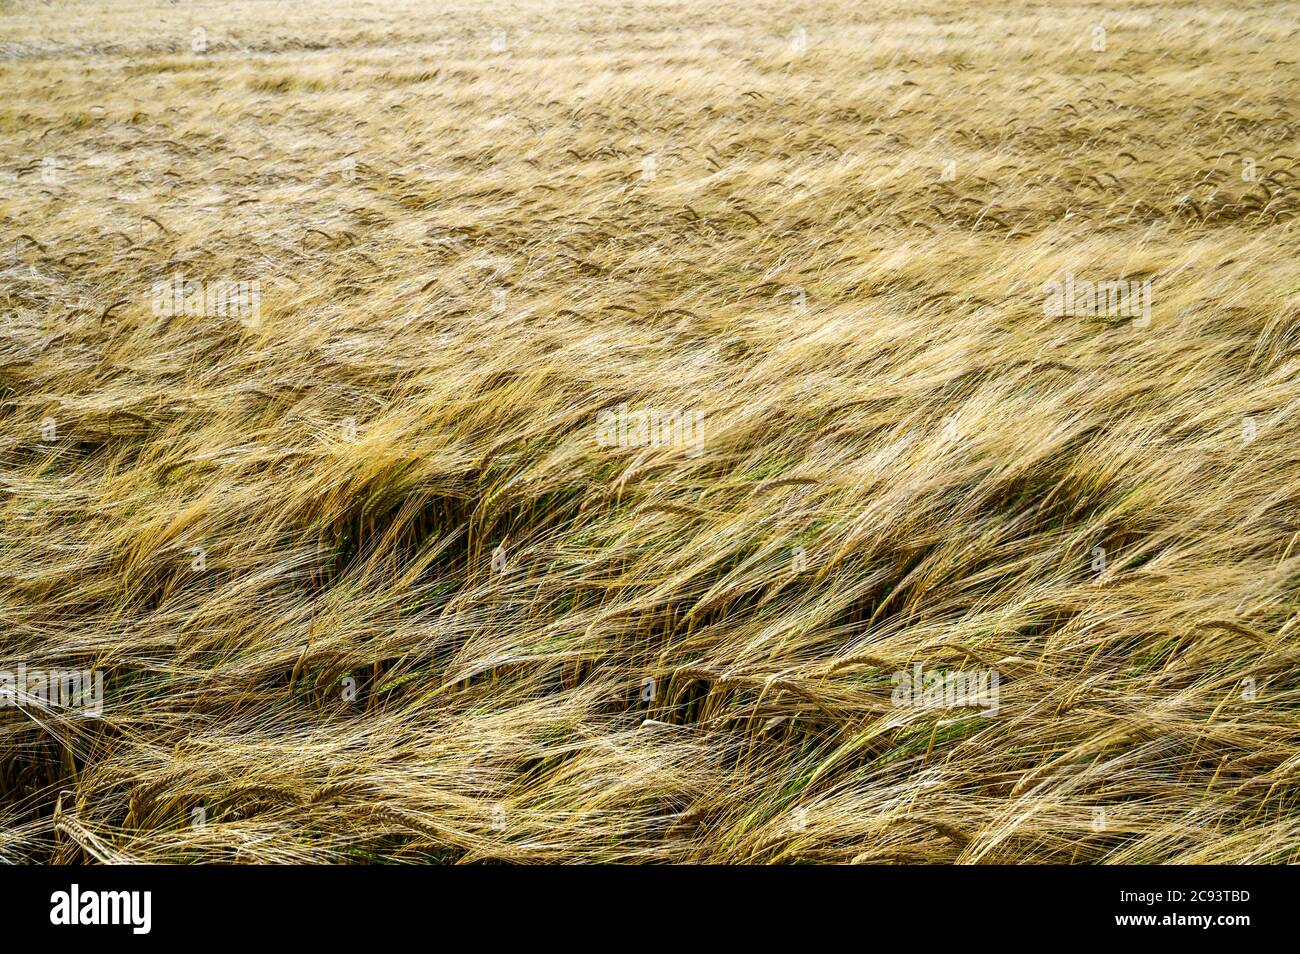 South Downs National Park, Sussex, England, UK. A field of barley blowing in the wind. The barley field looks like waves in the sea. Stock Photo